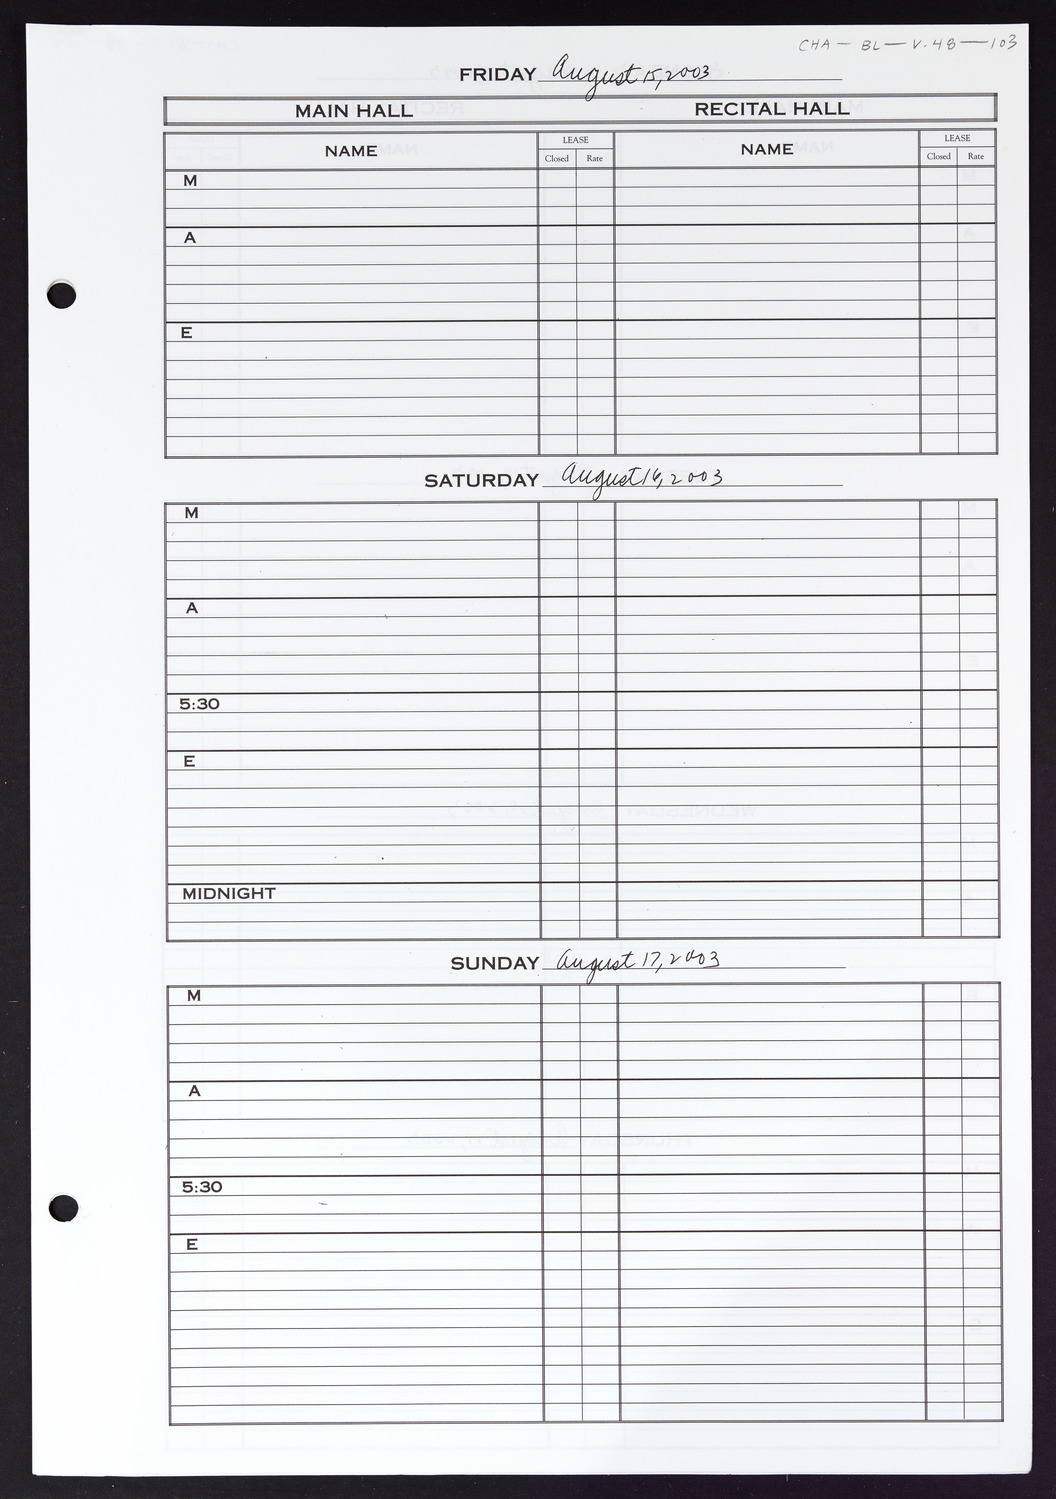 Carnegie Hall Booking Ledger, volume 48, page 103